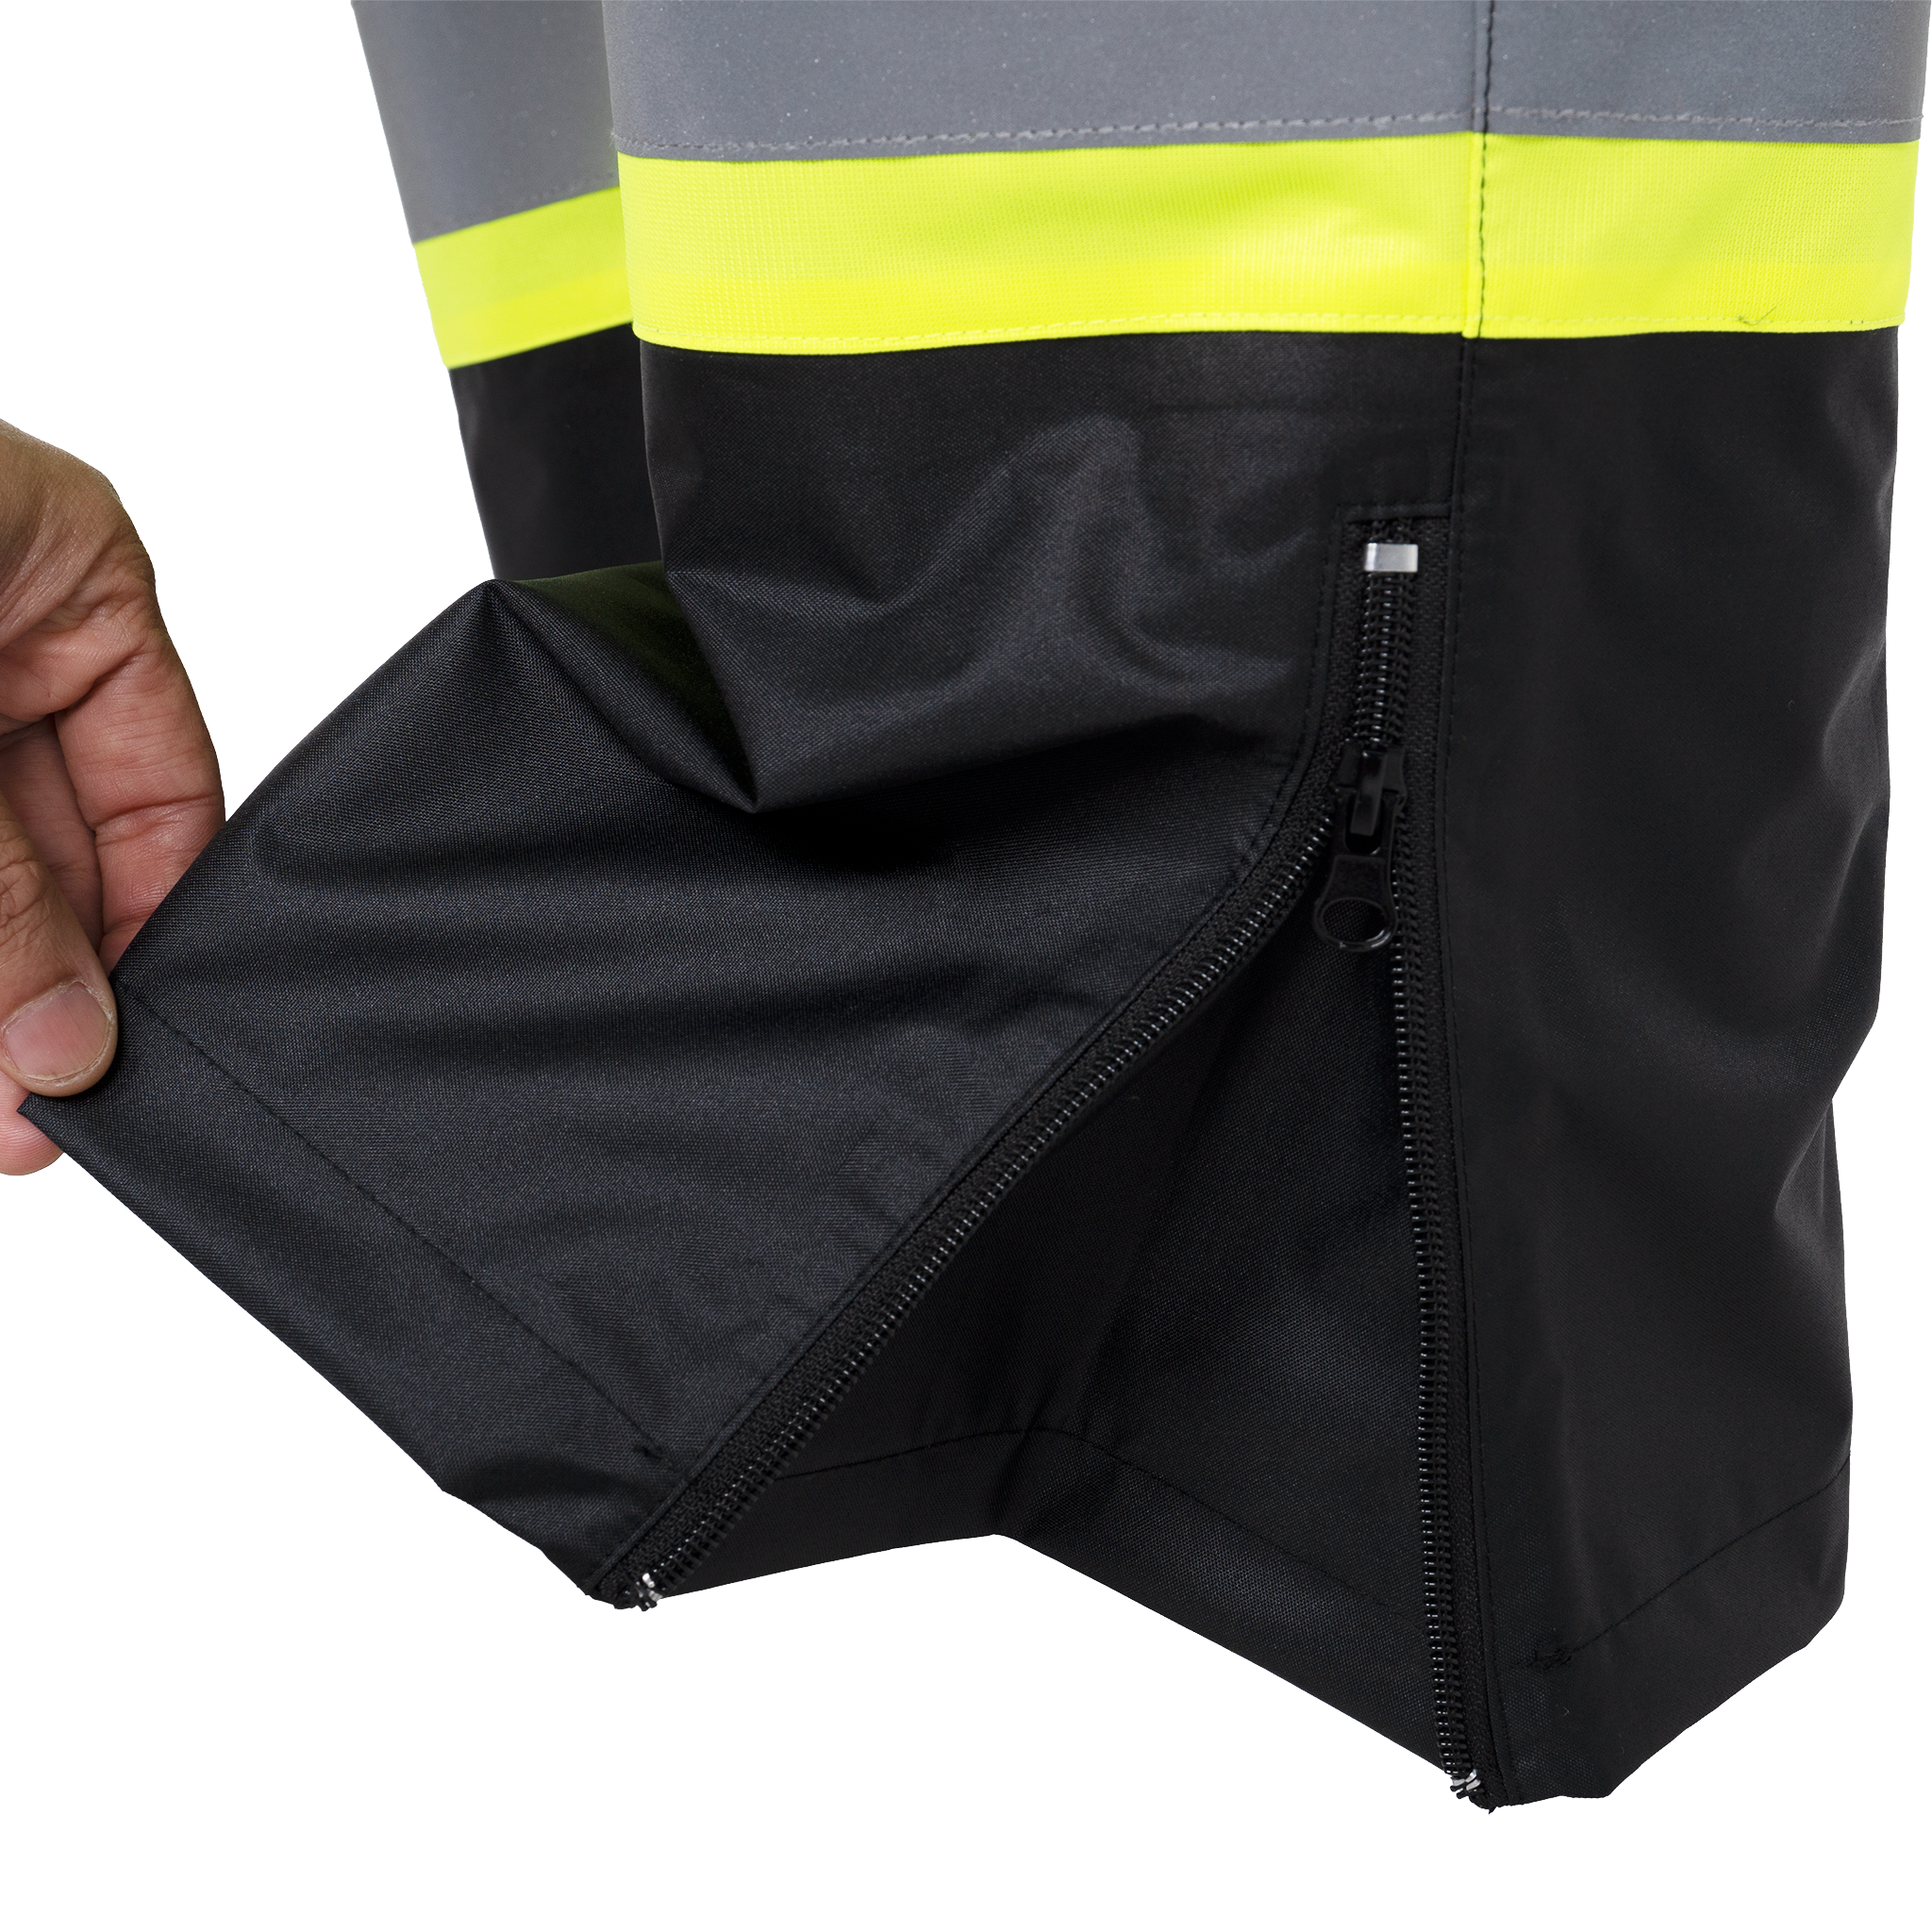 Hi Vis Two Tone Safety Rain Pants With Reflective Stripes